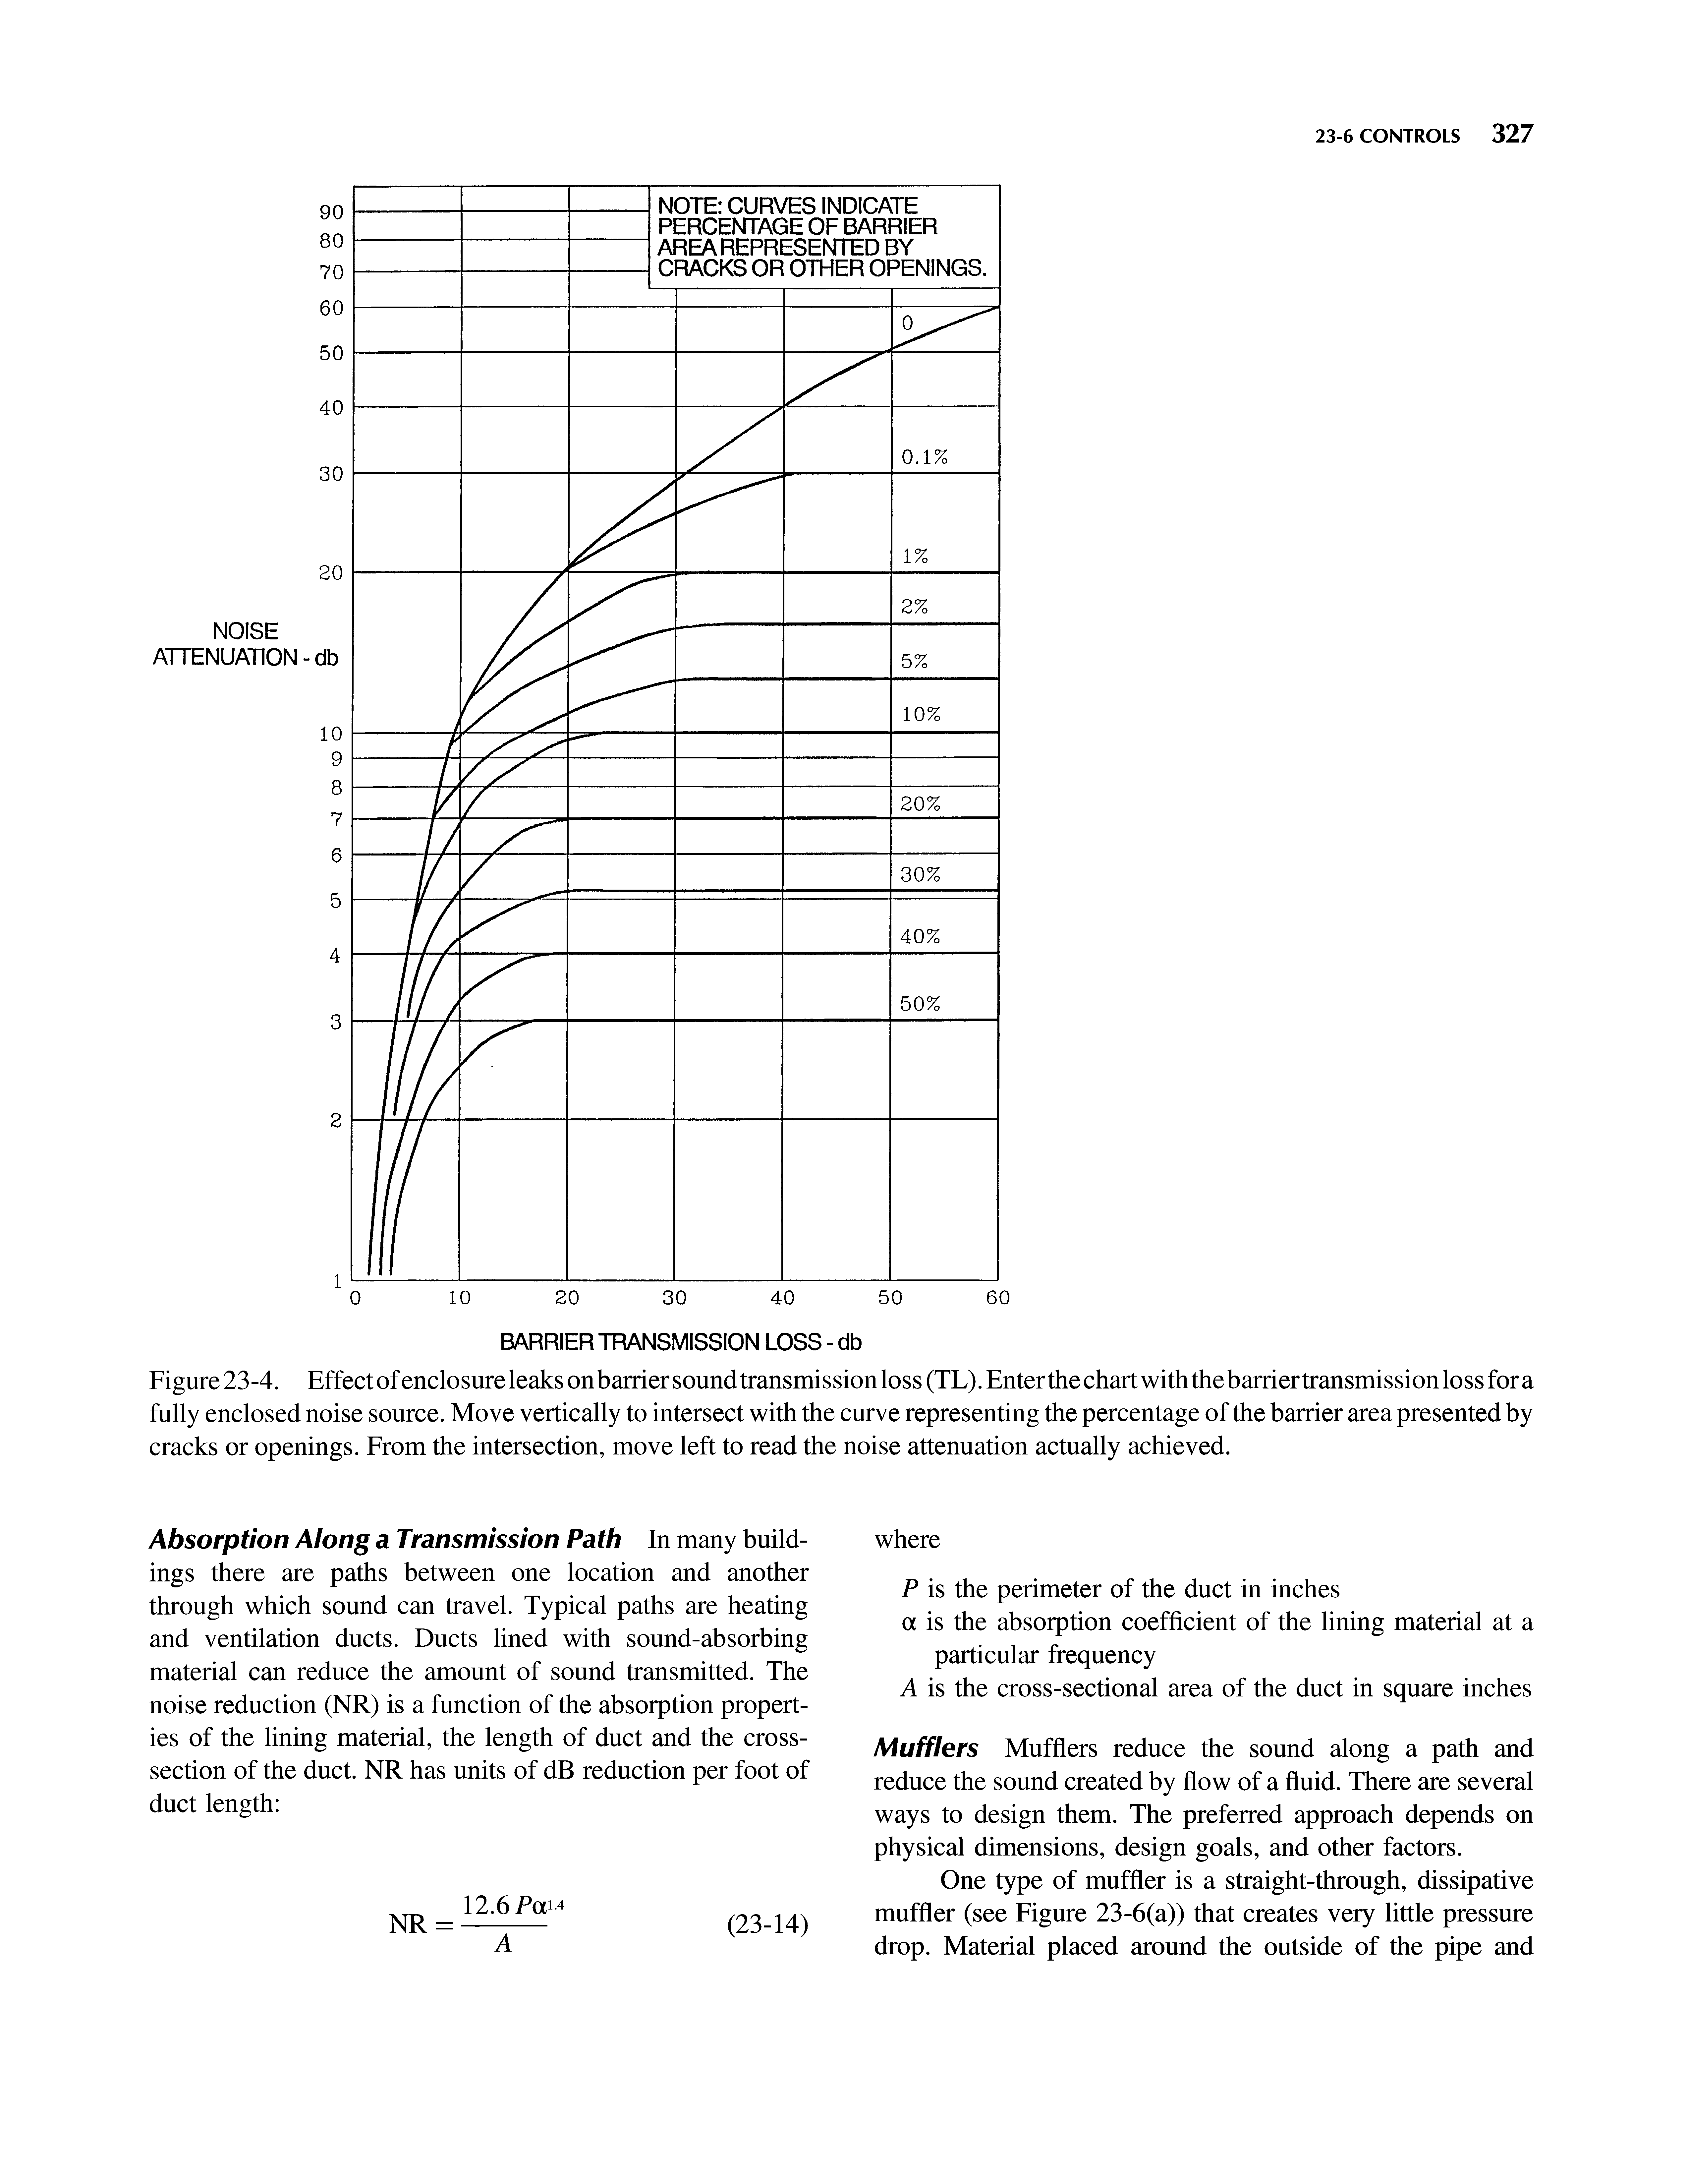 Figure 23-4. Effect of enclosure leaks onbarrier sound transmission loss (TL). Enter the chart with thebarrier transmission loss for a fully enclosed noise source. Move vertically to intersect with the curve representing the percentage of the barrier area presented by cracks or openings. From the intersection, move left to read the noise attenuation actually achieved.